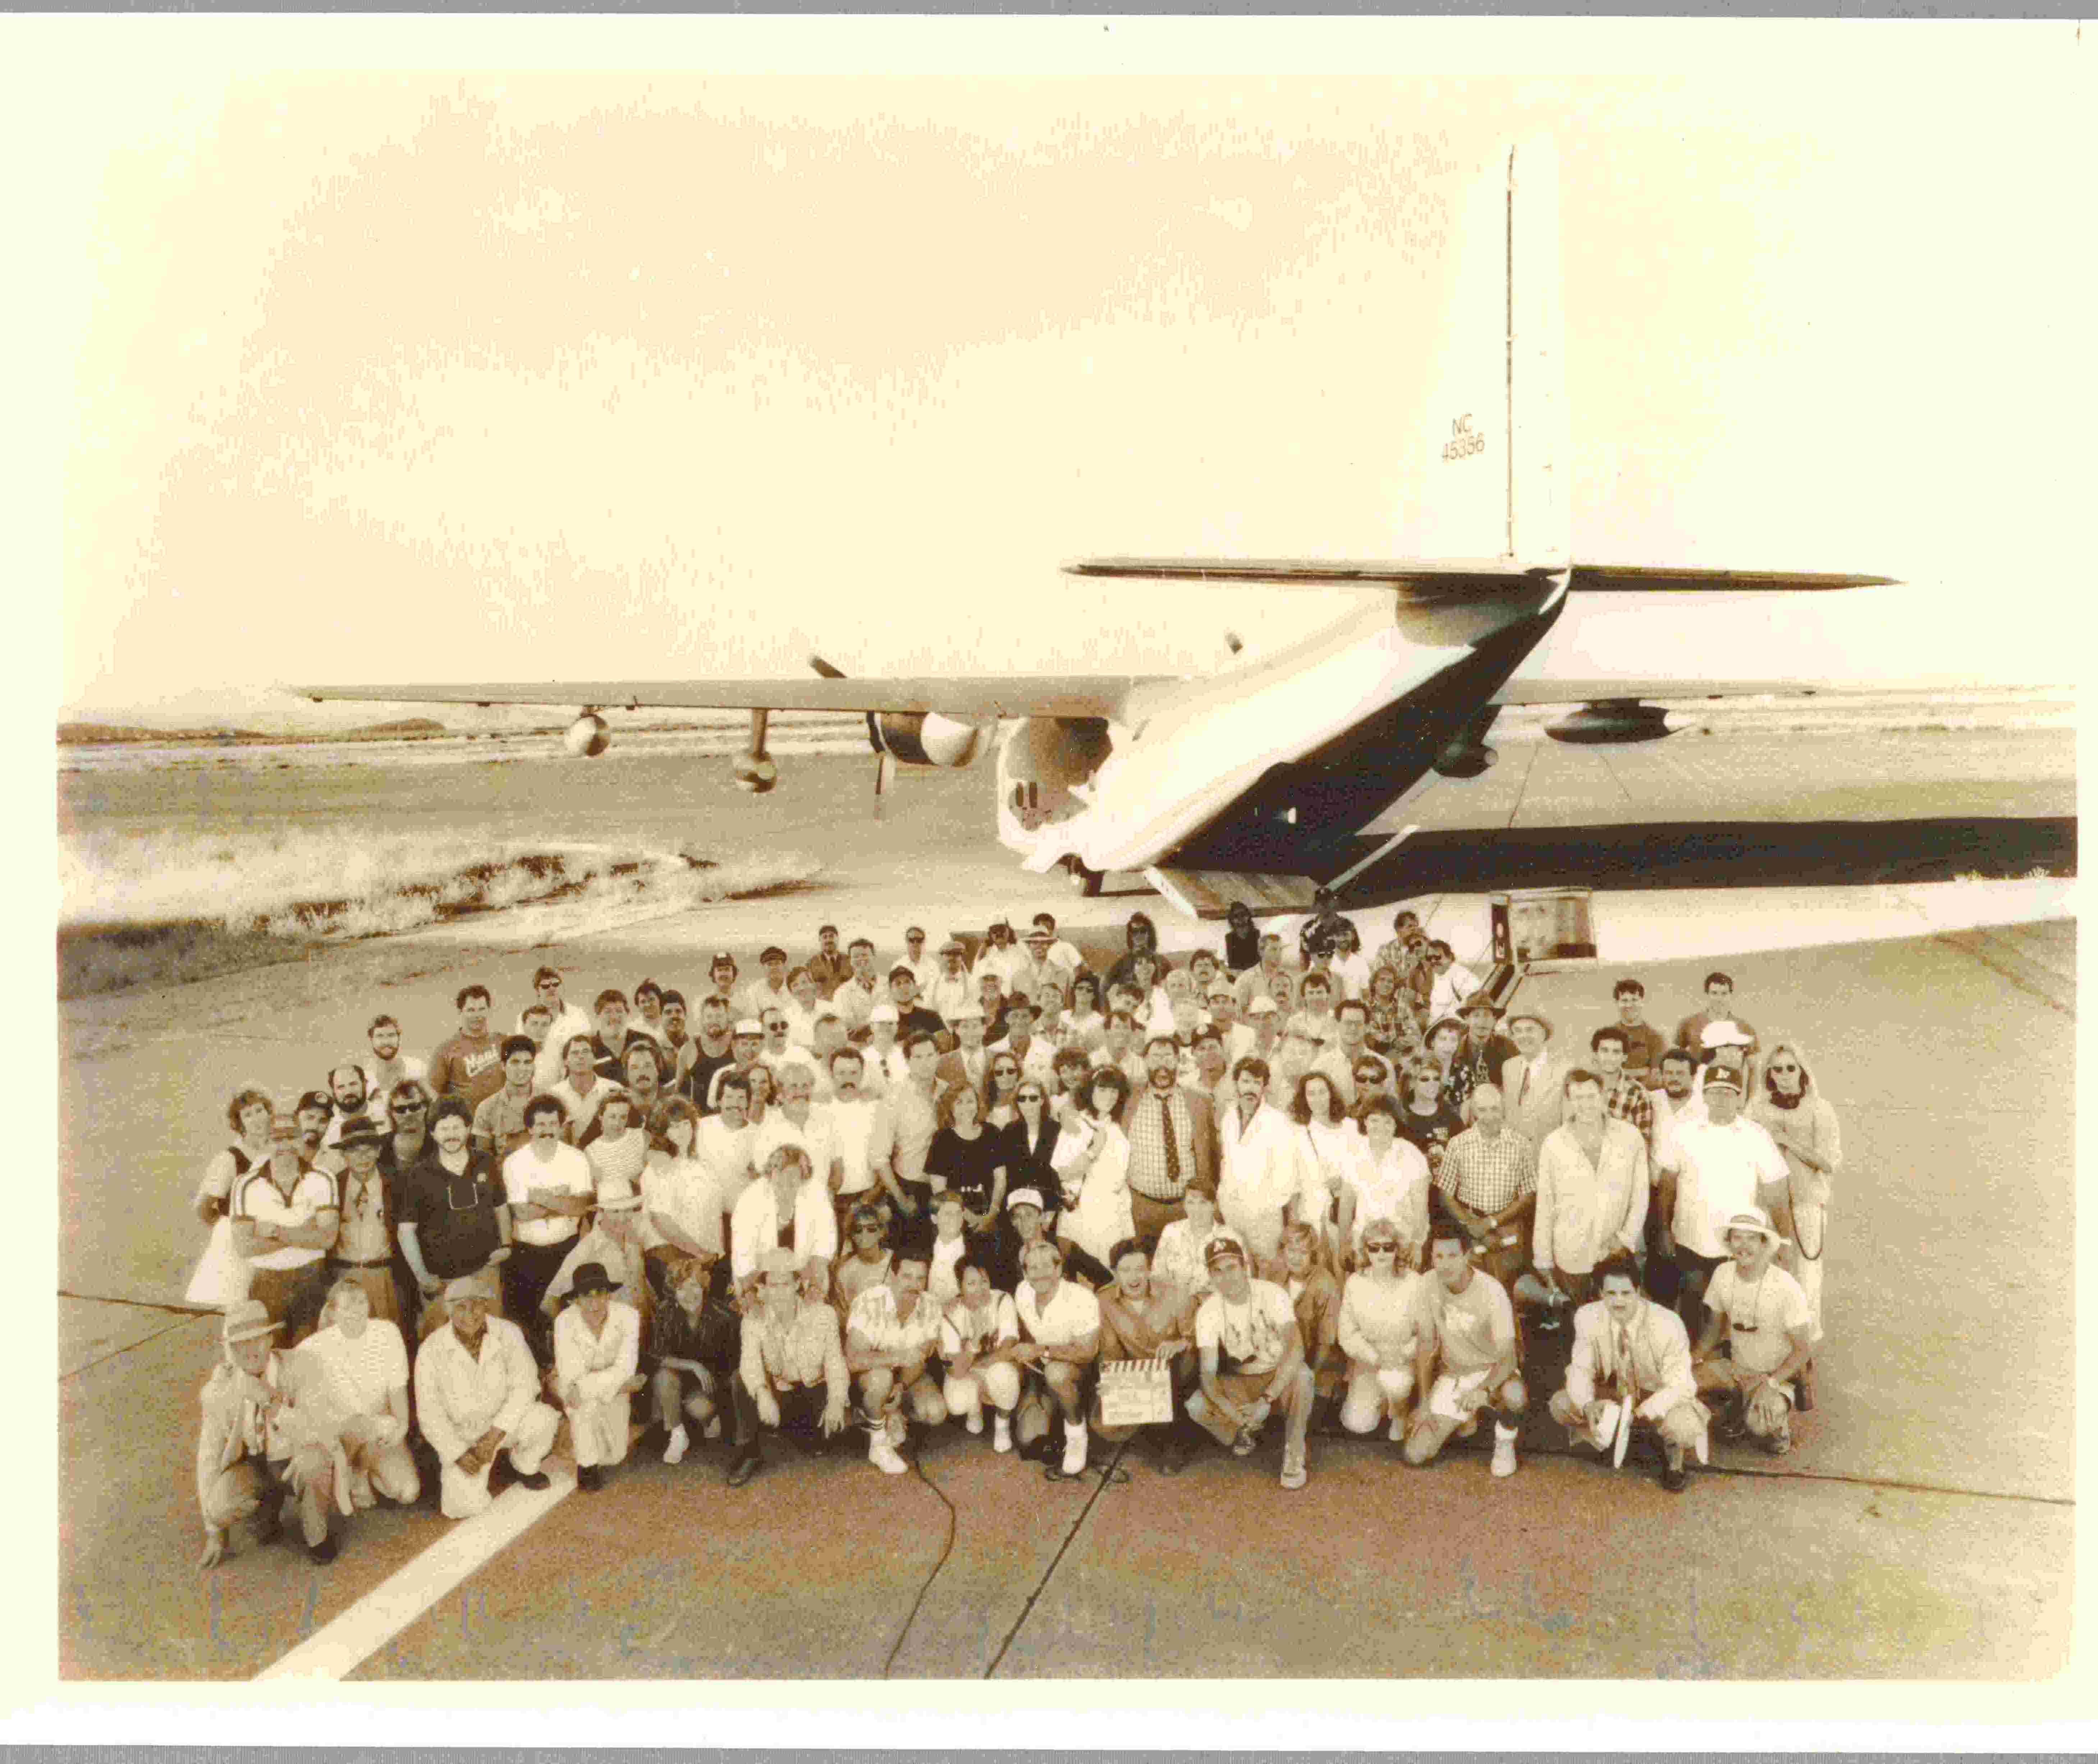 Before loading up Northern California TUCKER crew to shoot Howard Hughes' Spruce Goose in Long Beach.